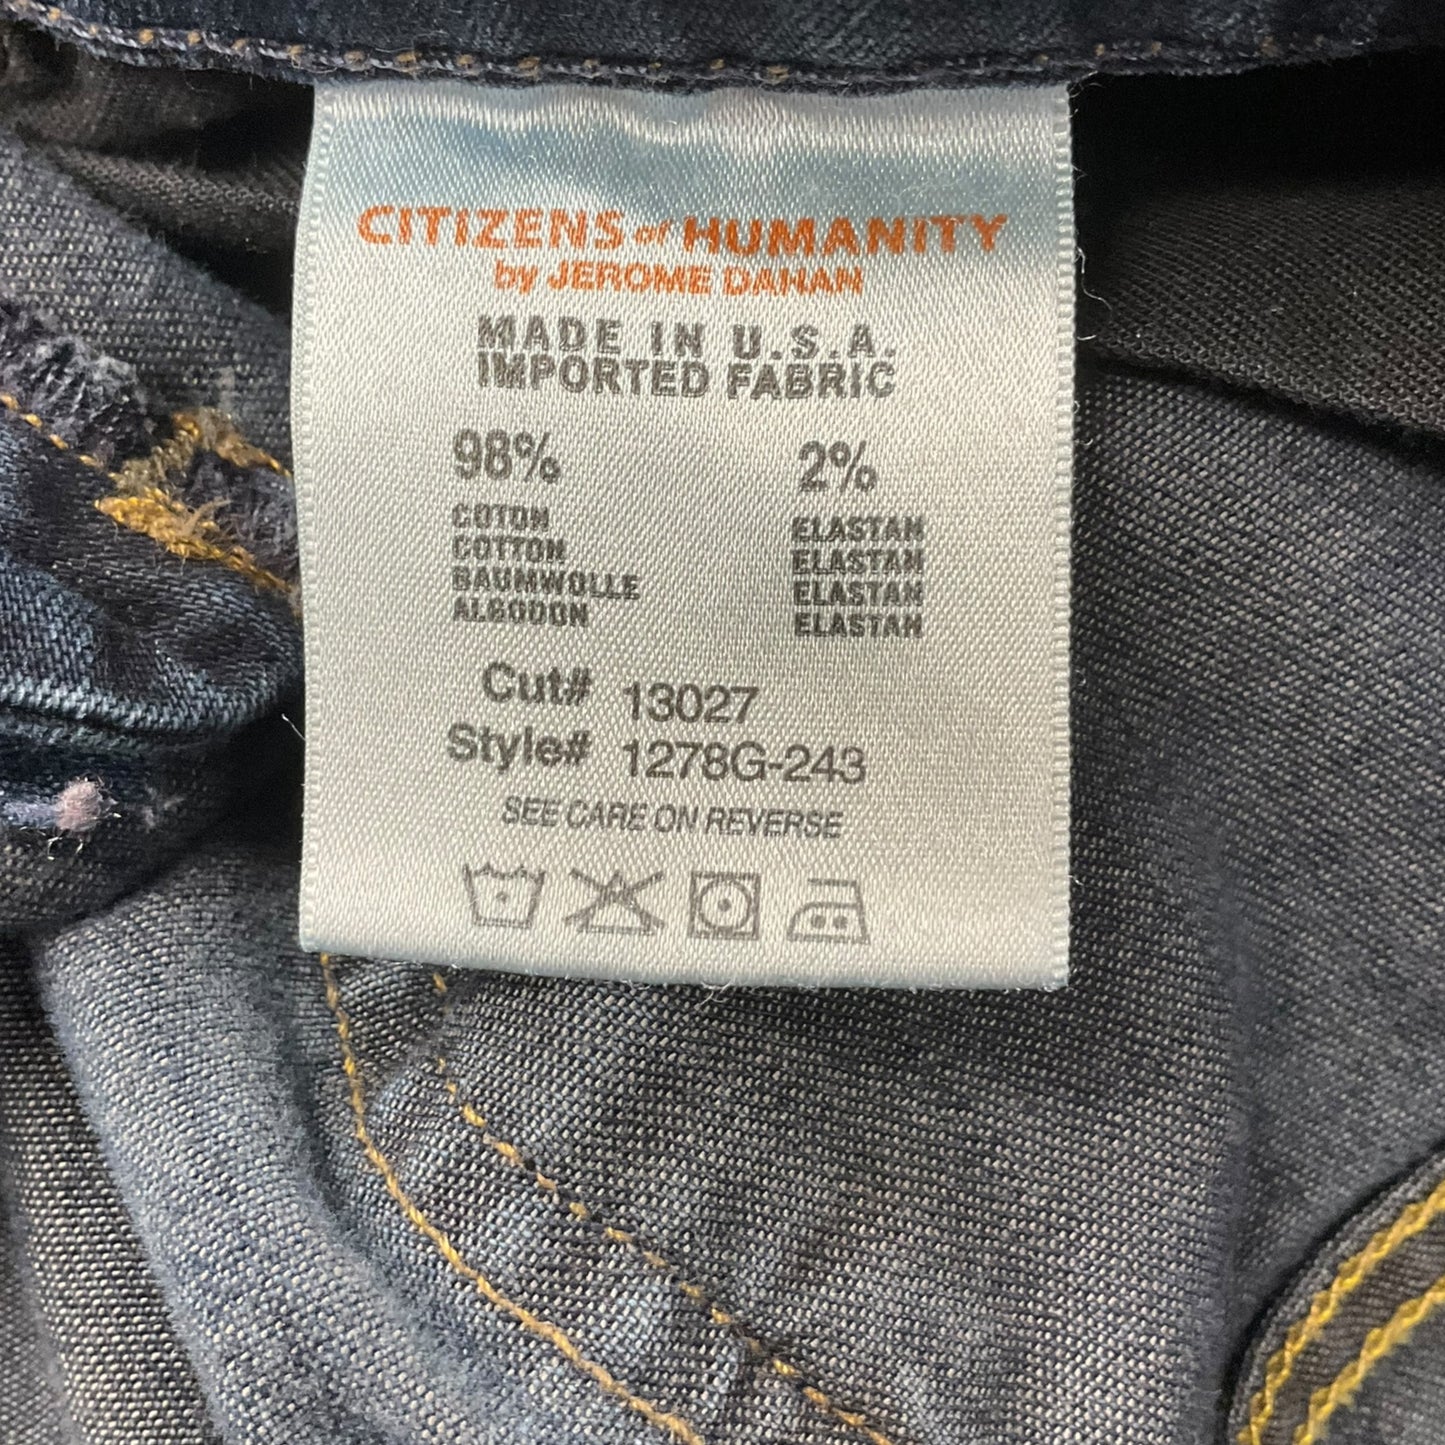 Jeans Skinny By Citizens Of Humanity  Size: 6